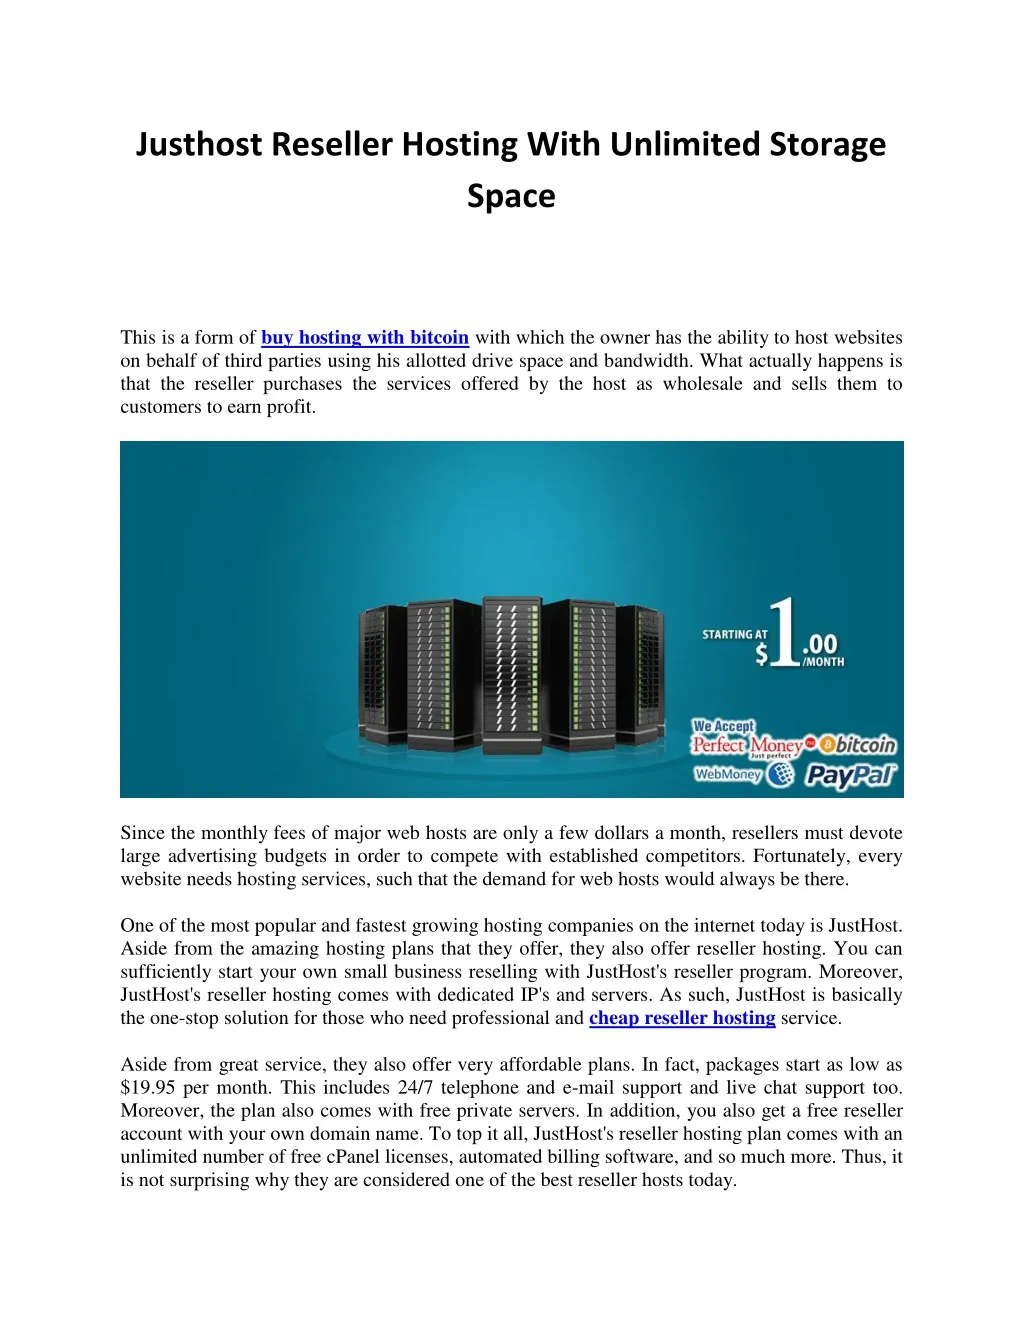 justhost reseller hosting with unlimited storage